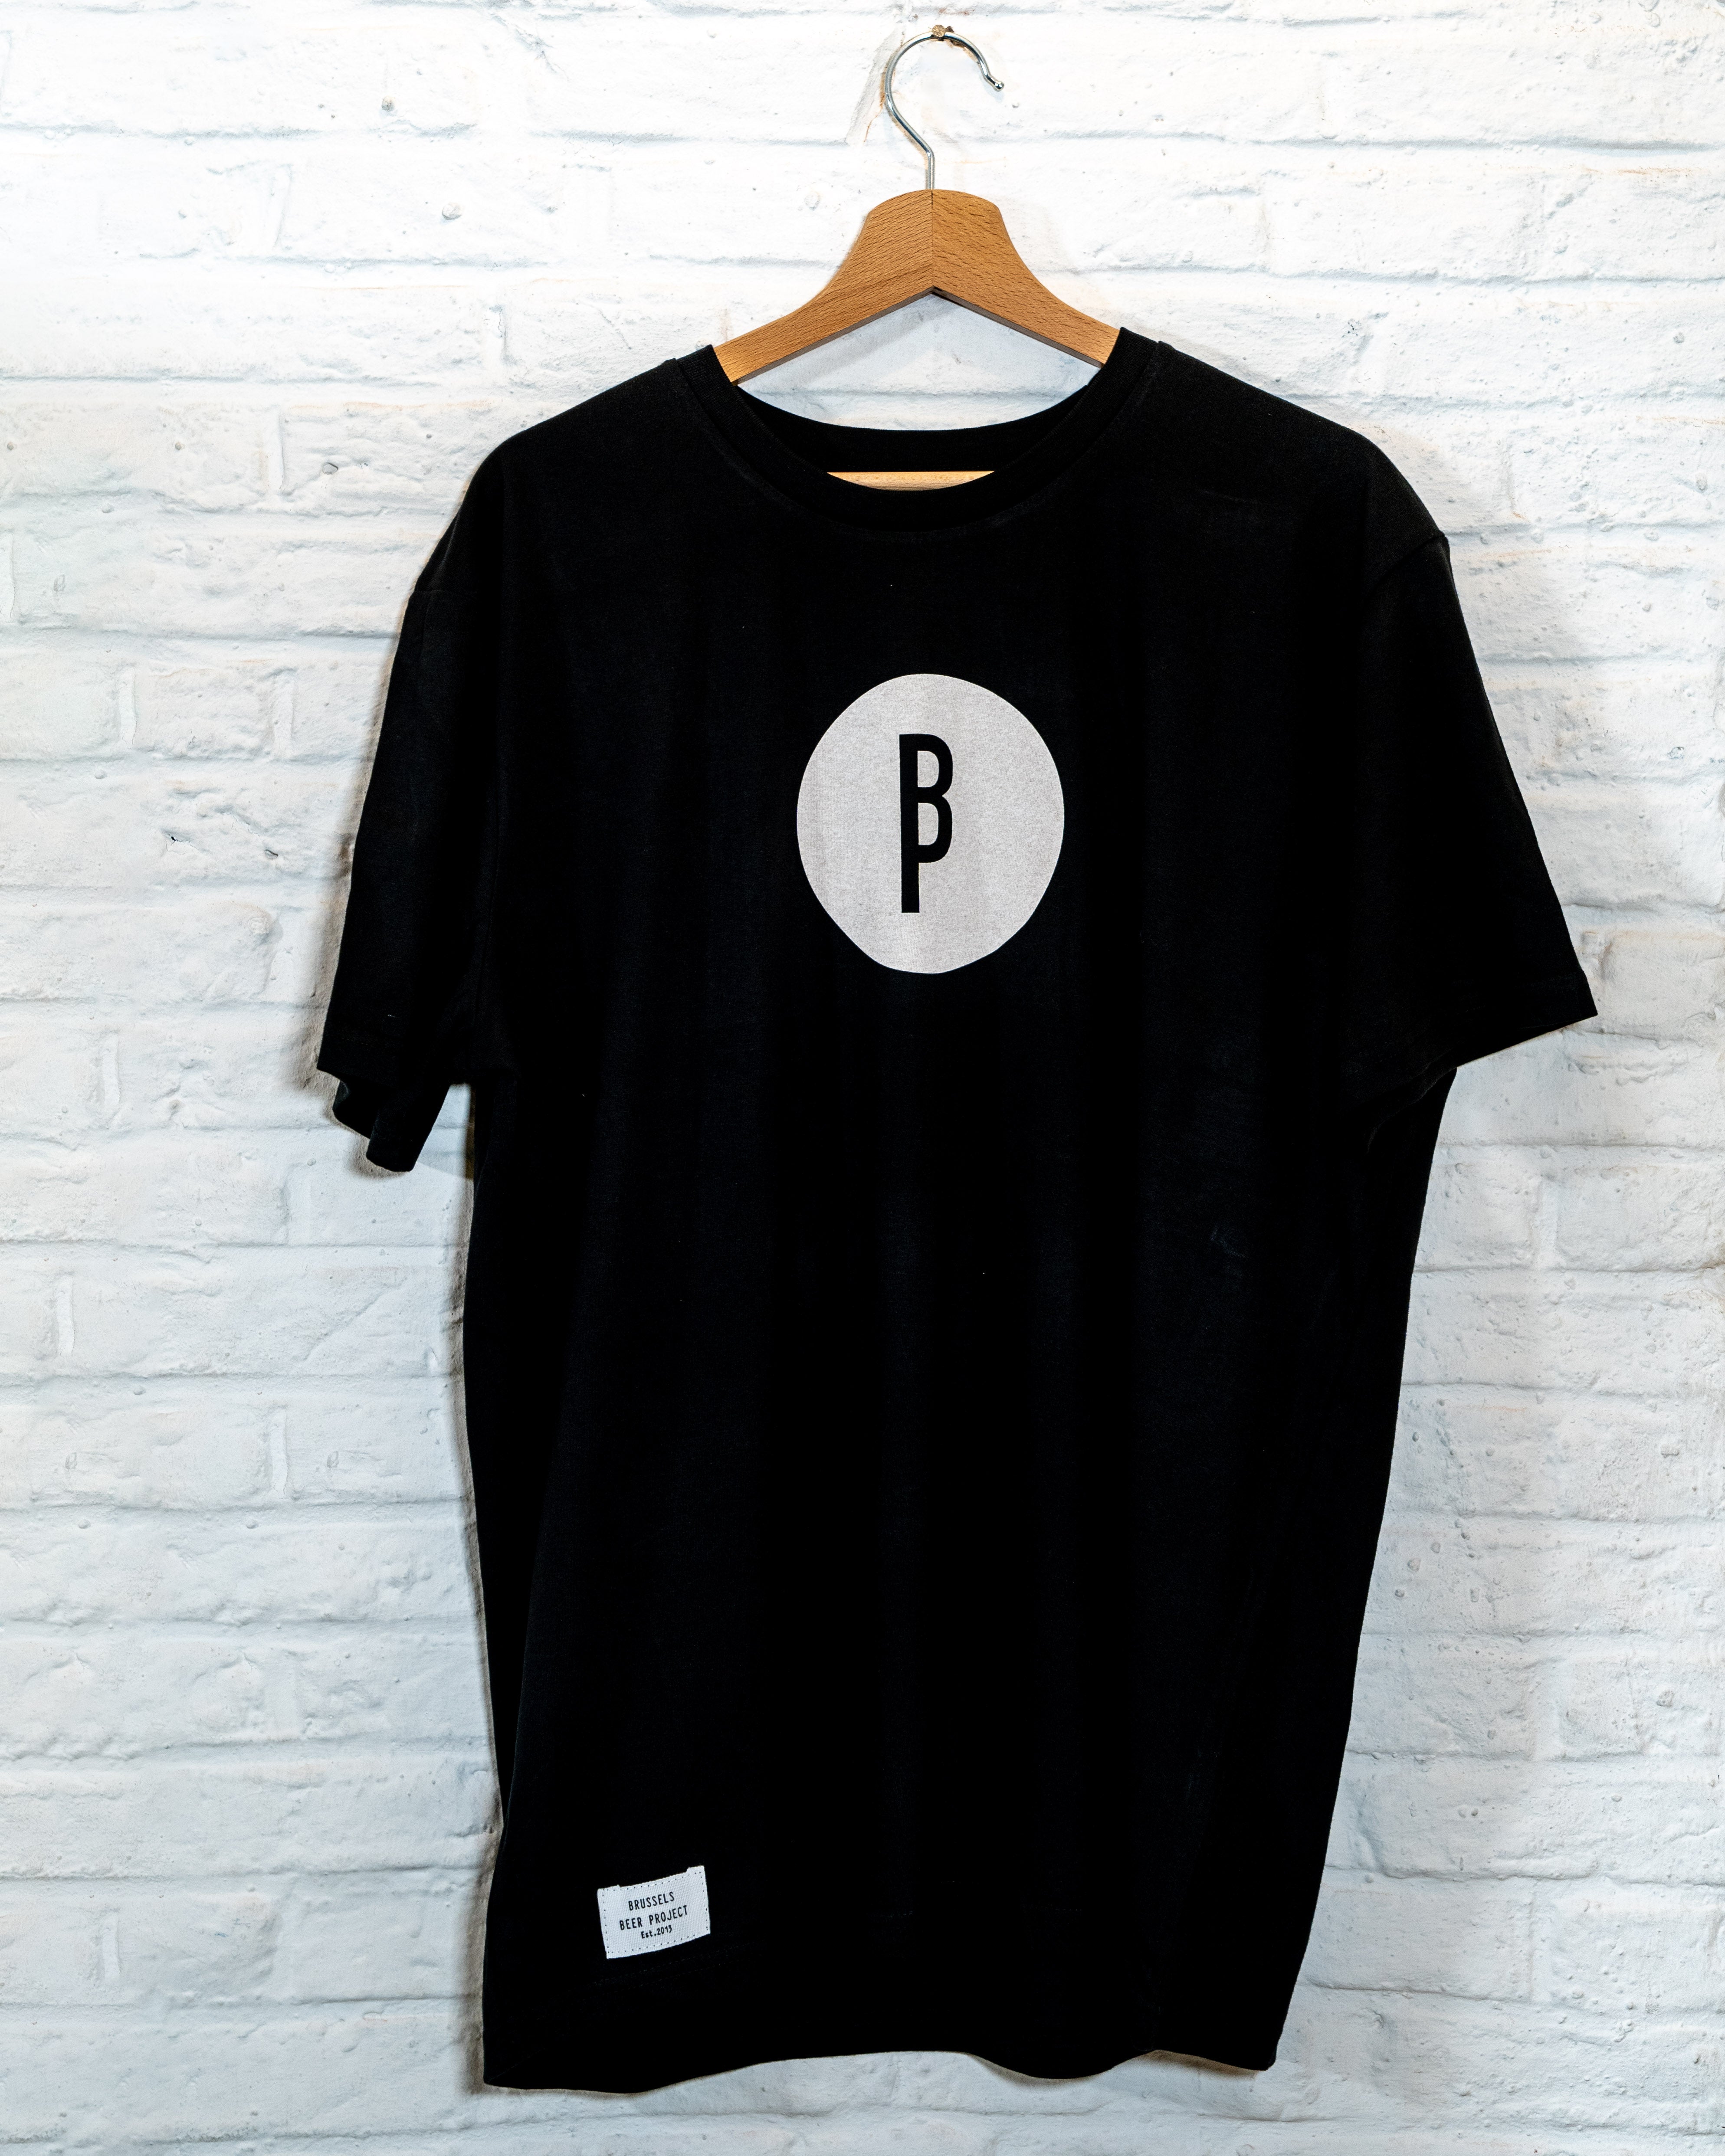 T-SHIRT Brussels Beer Project Beta Black